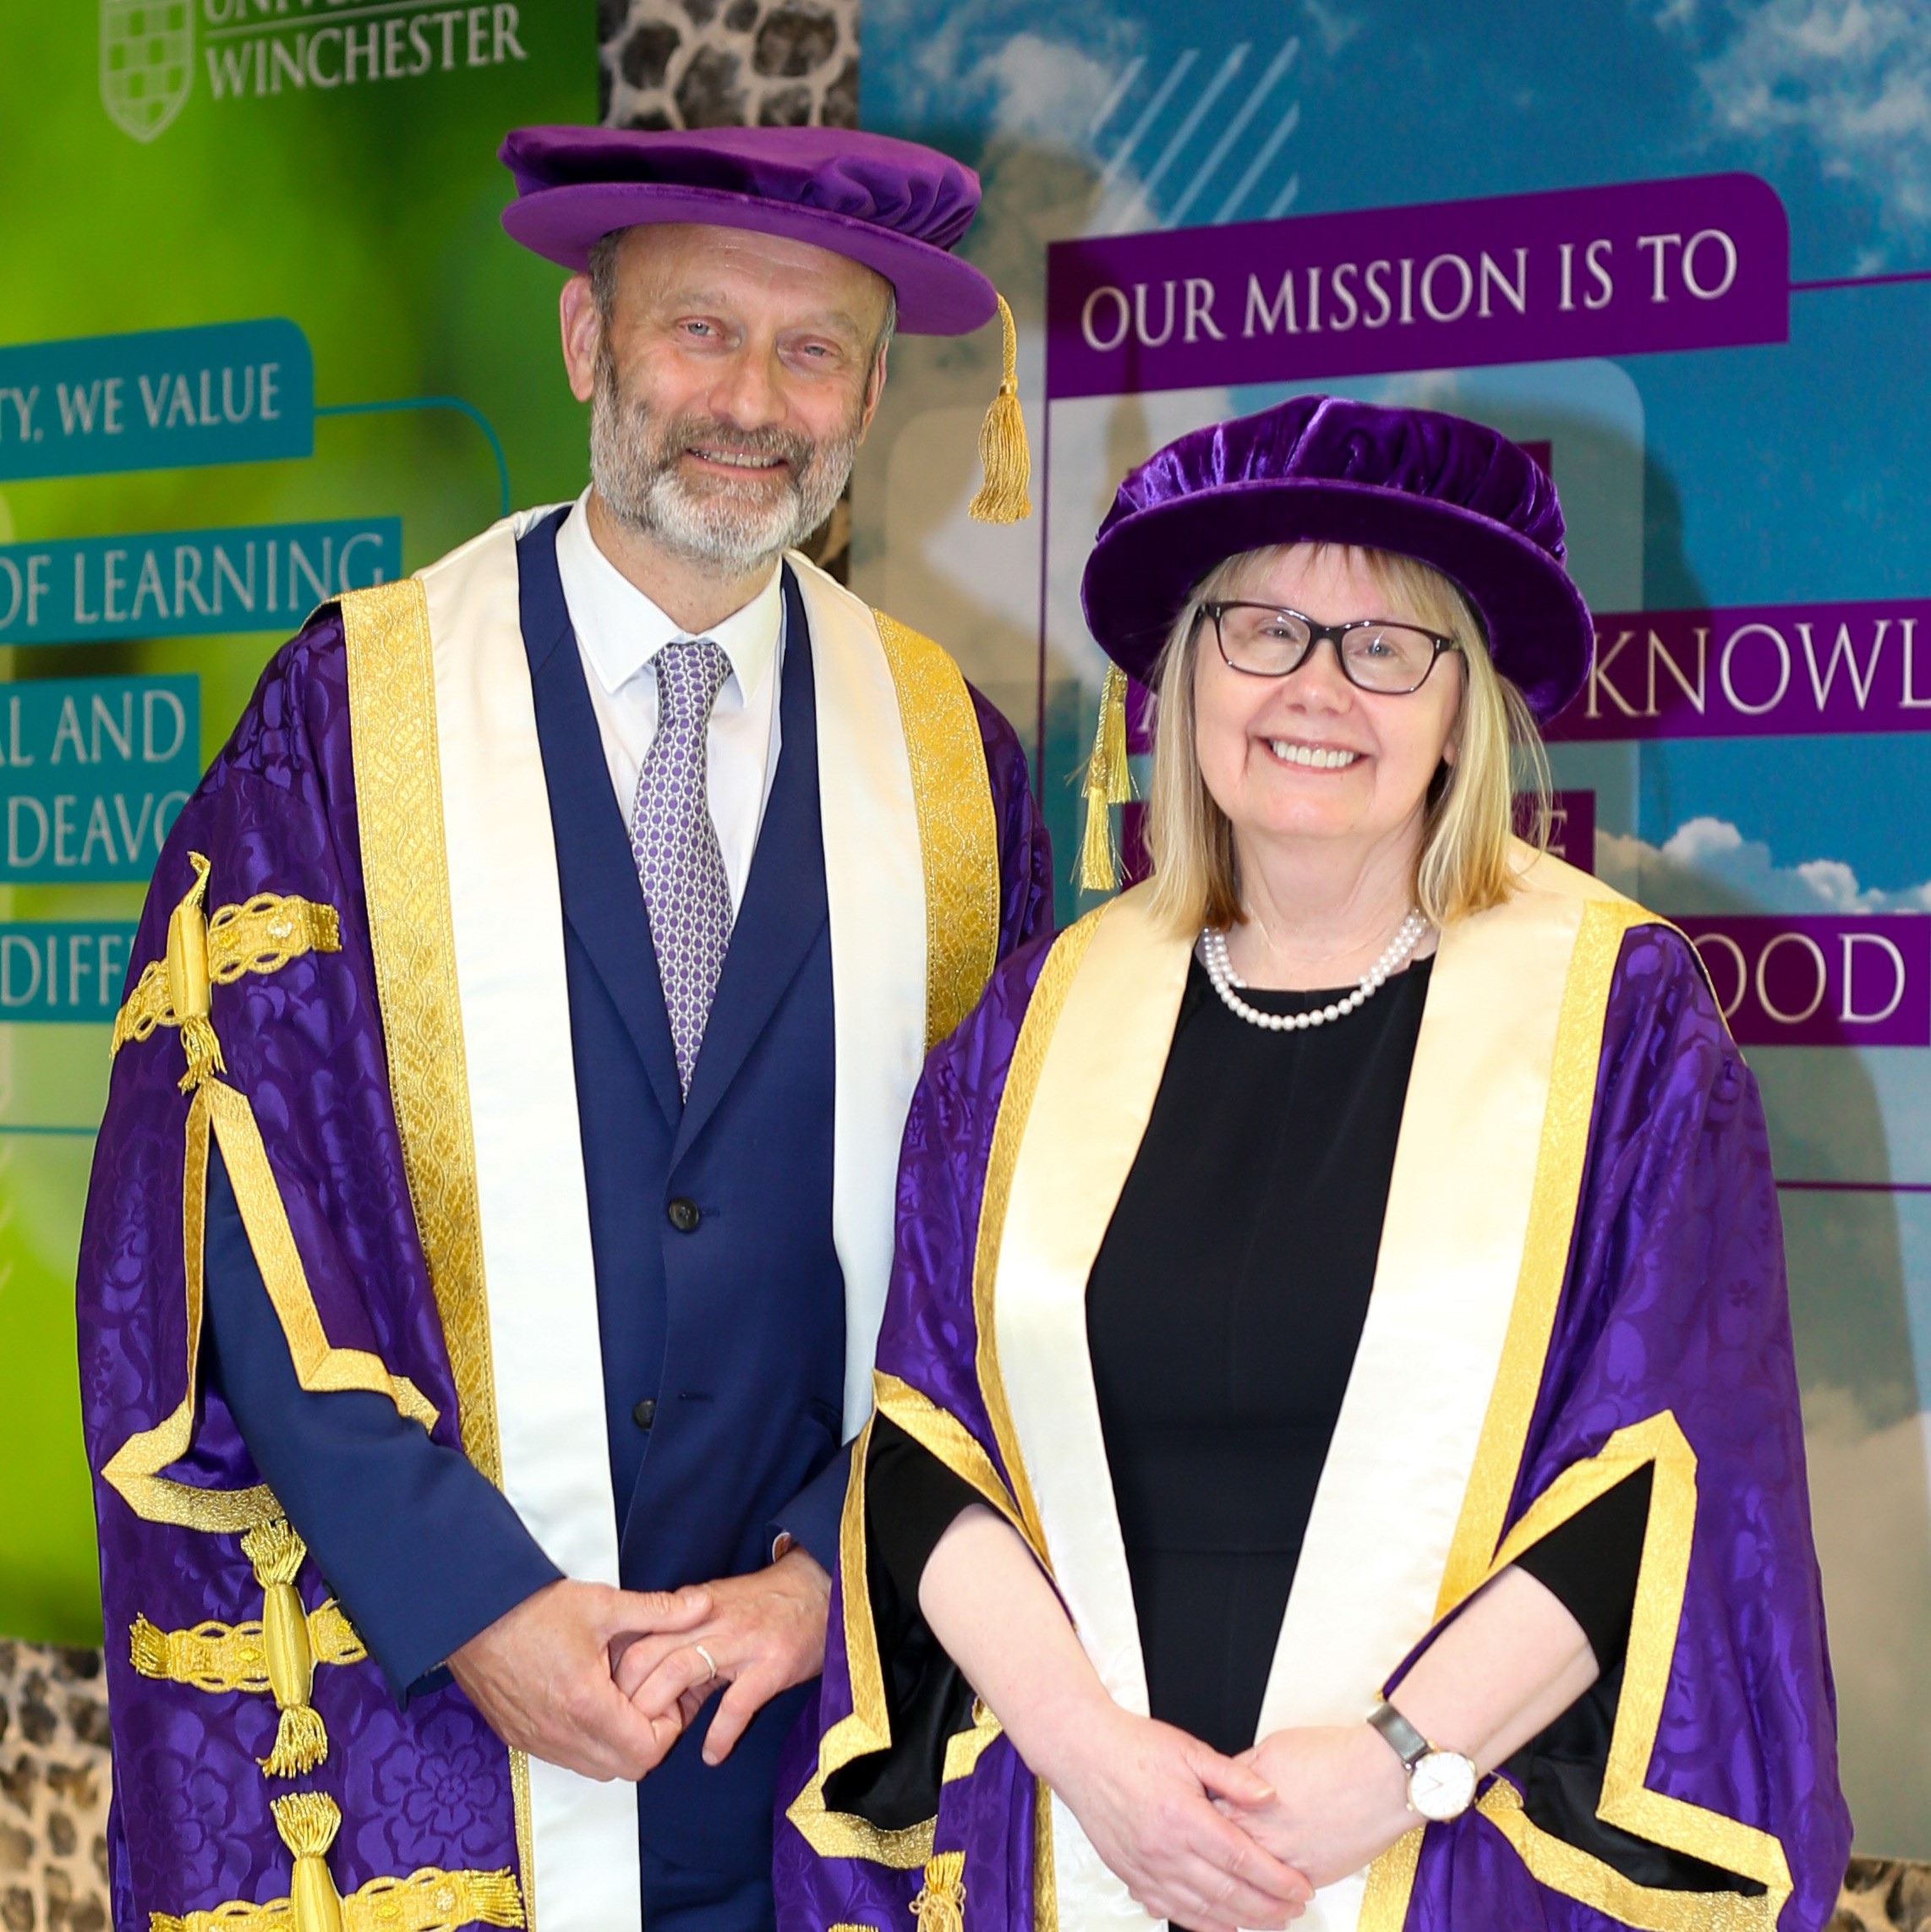 Man and woman purple academic robes